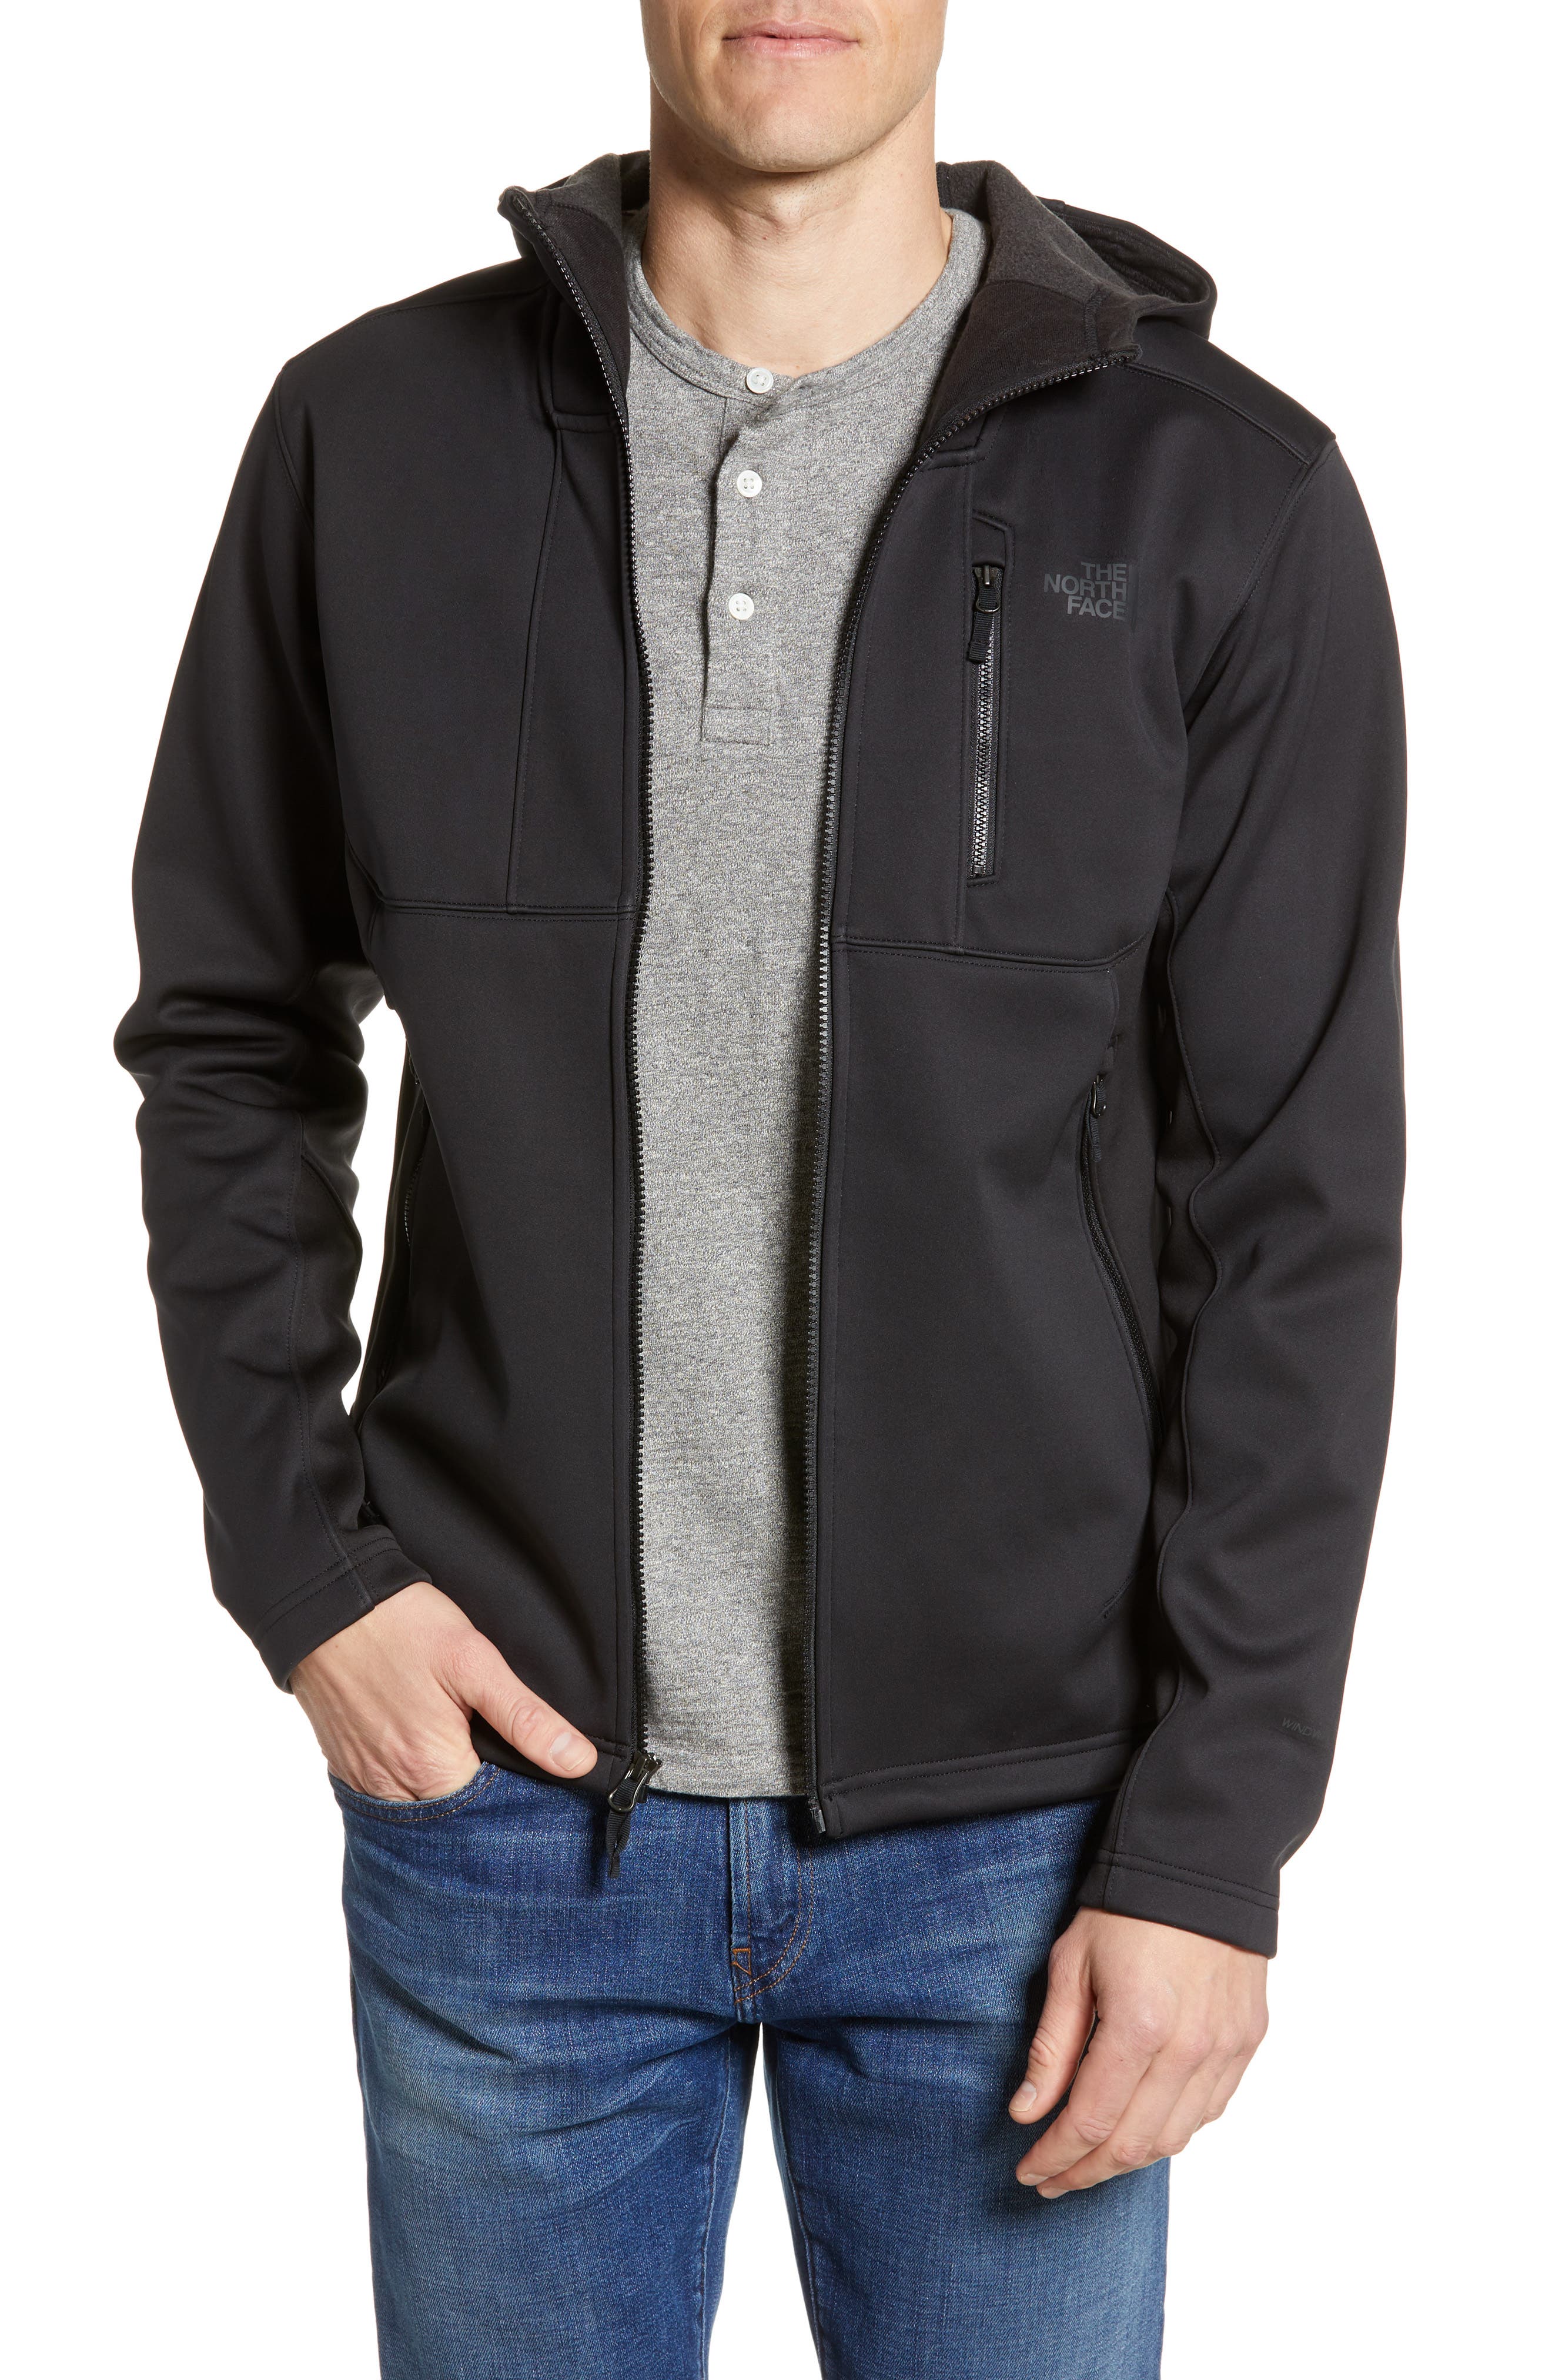 north face risor hoodie